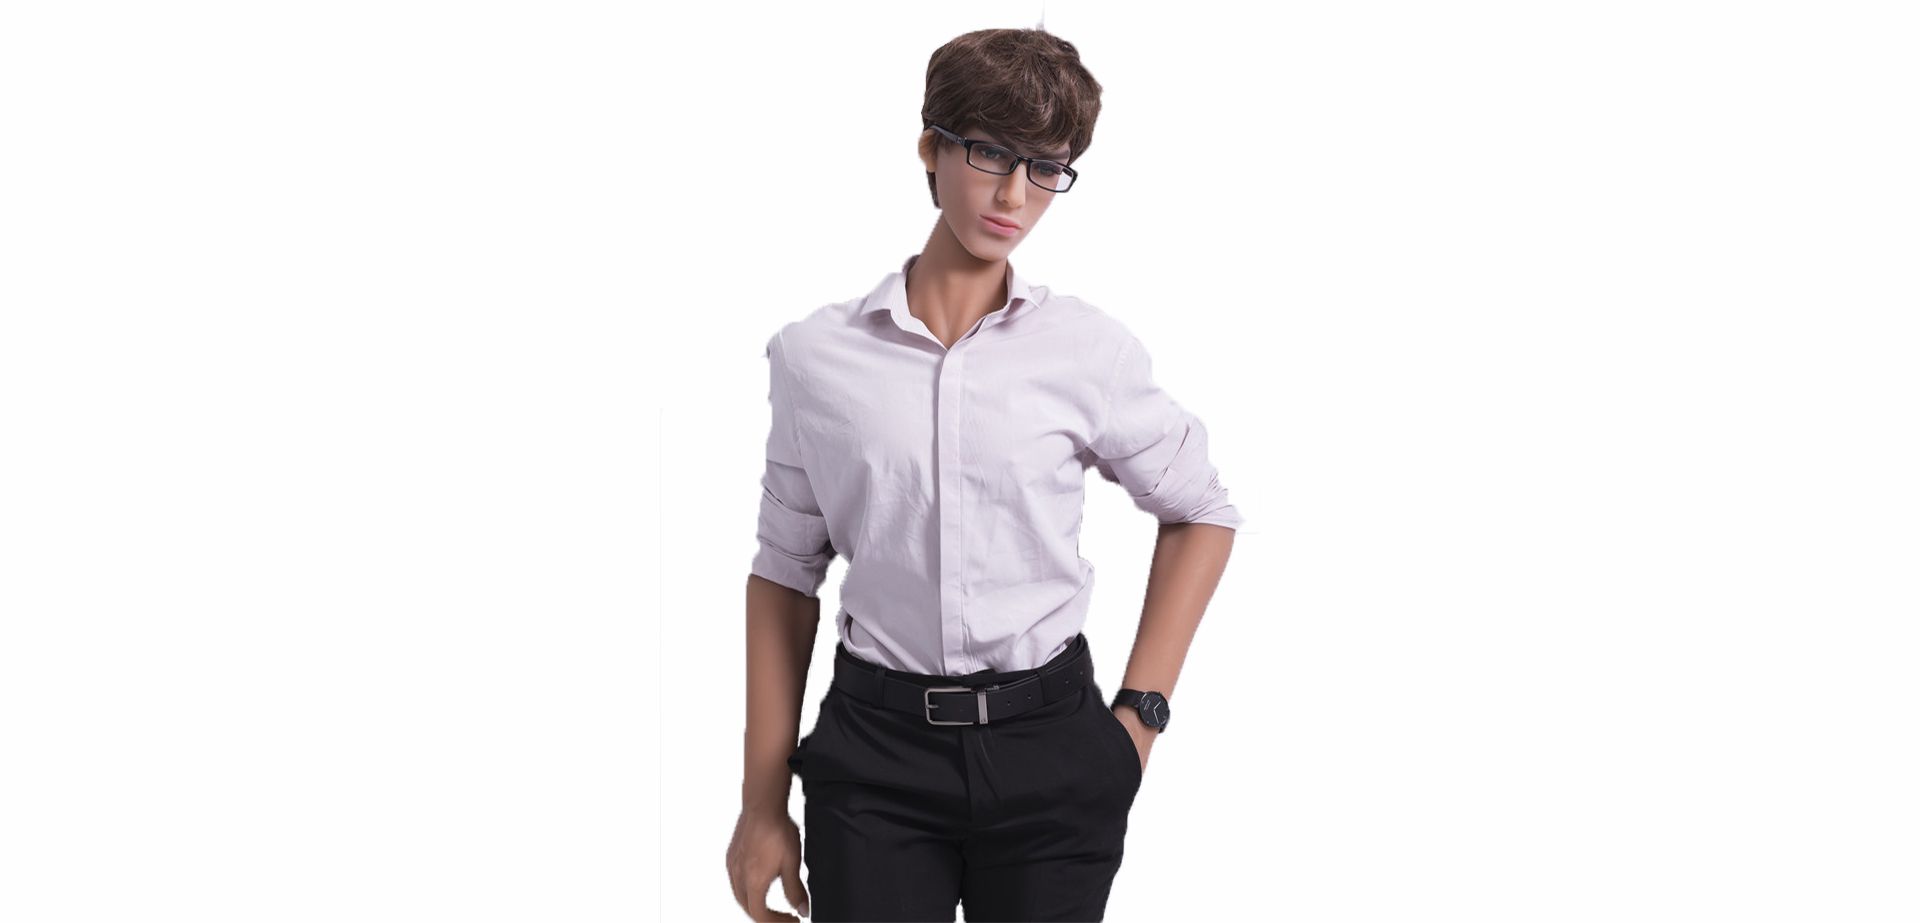 Gay sex doll in a business suit.